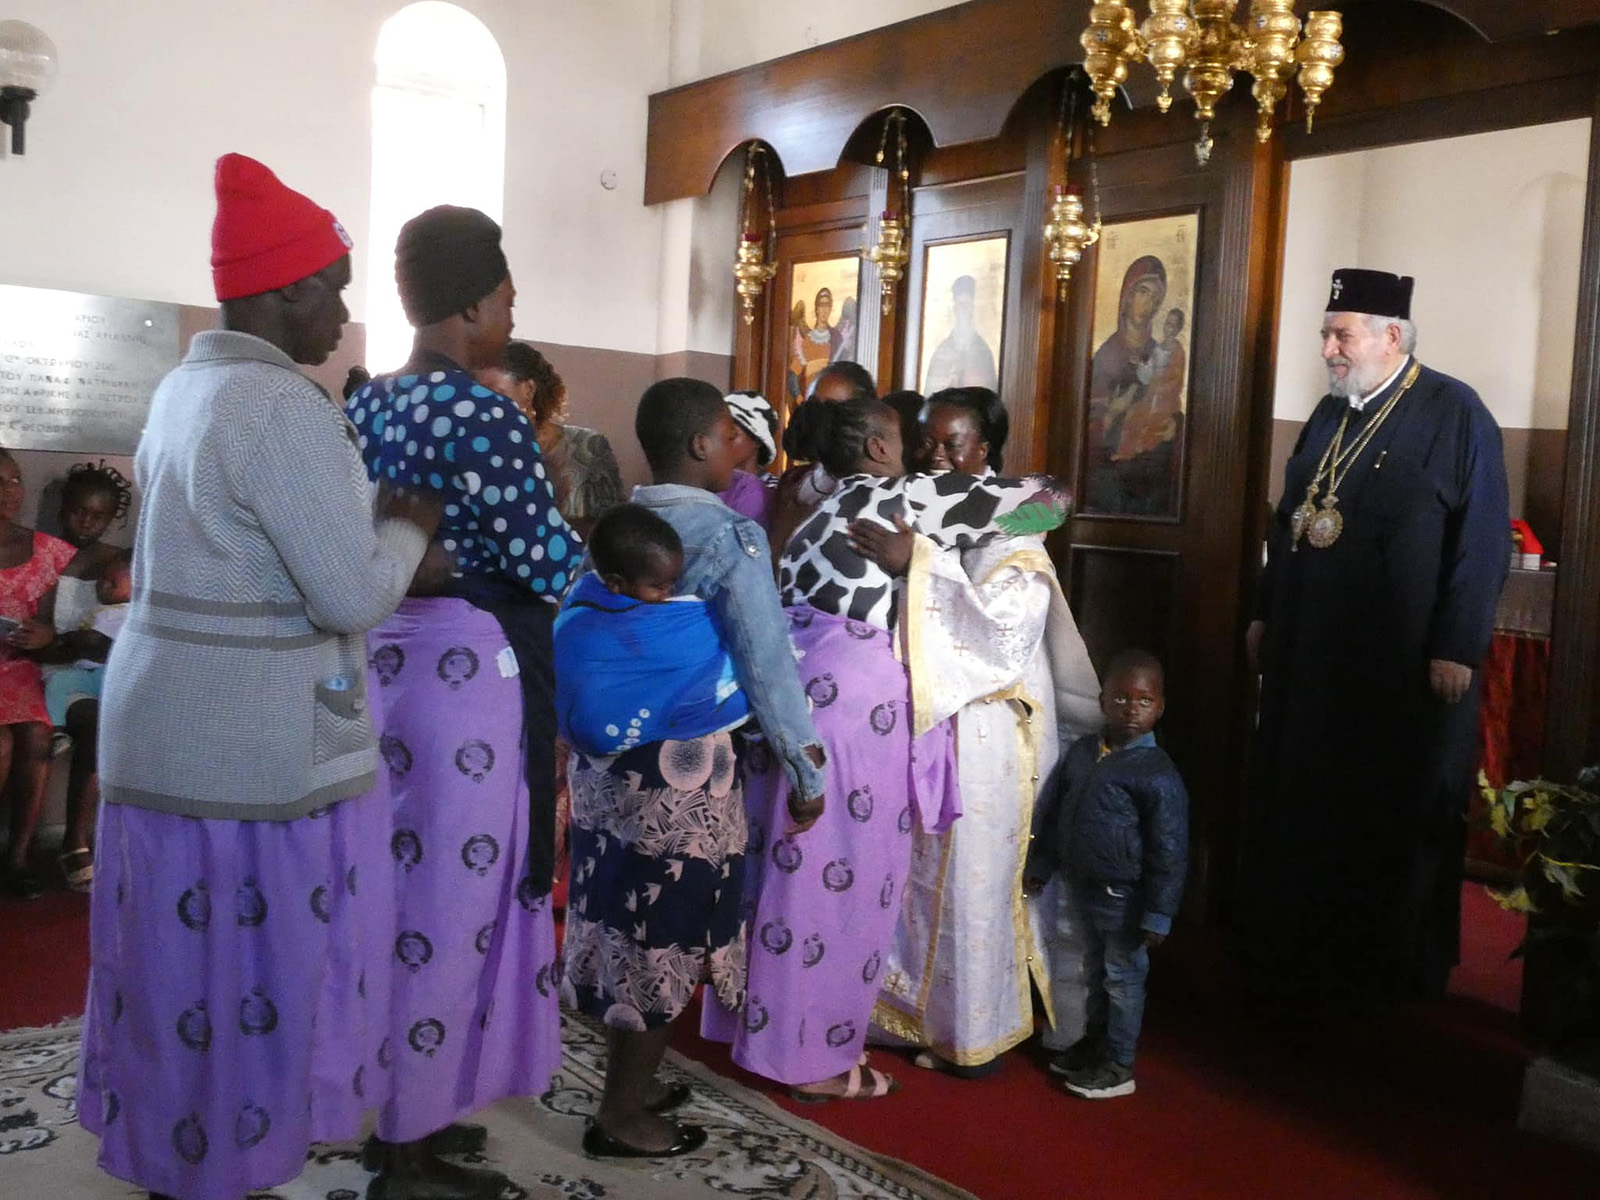 Eastern Orthodox Church ordains Zimbabwean woman as its first deaconess